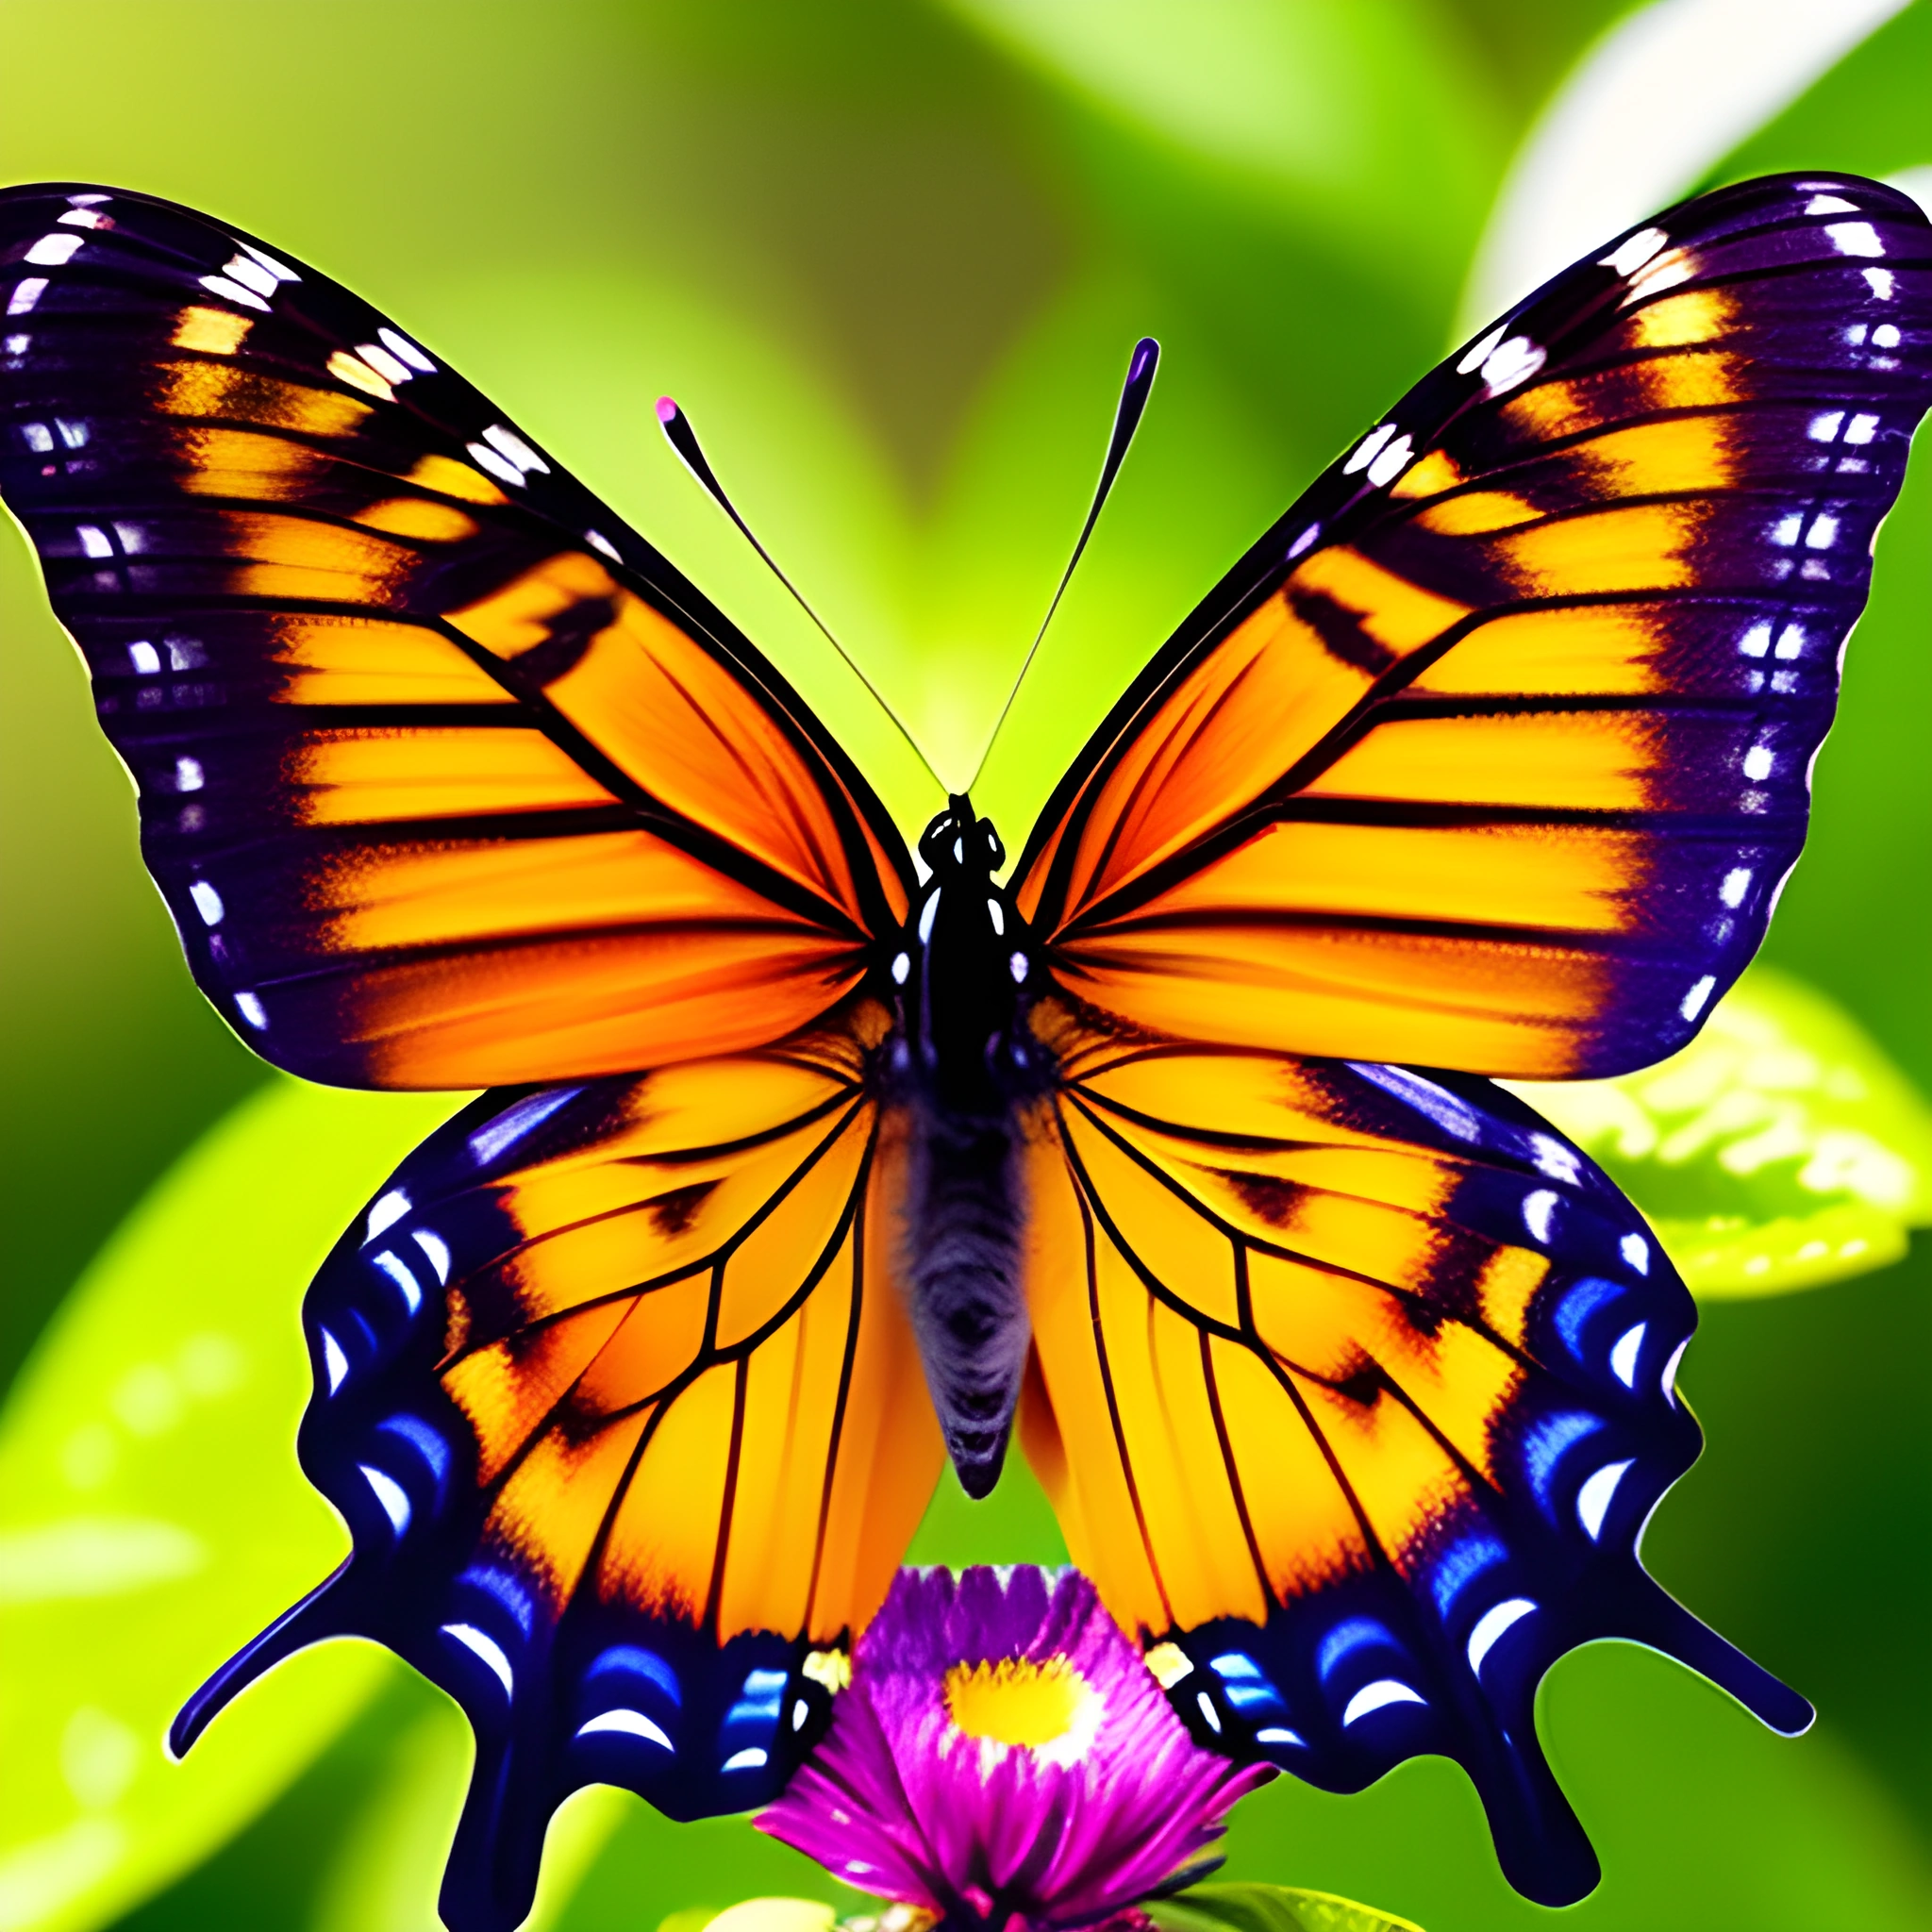 butterfly with orange and blue wings sitting on a purple flower